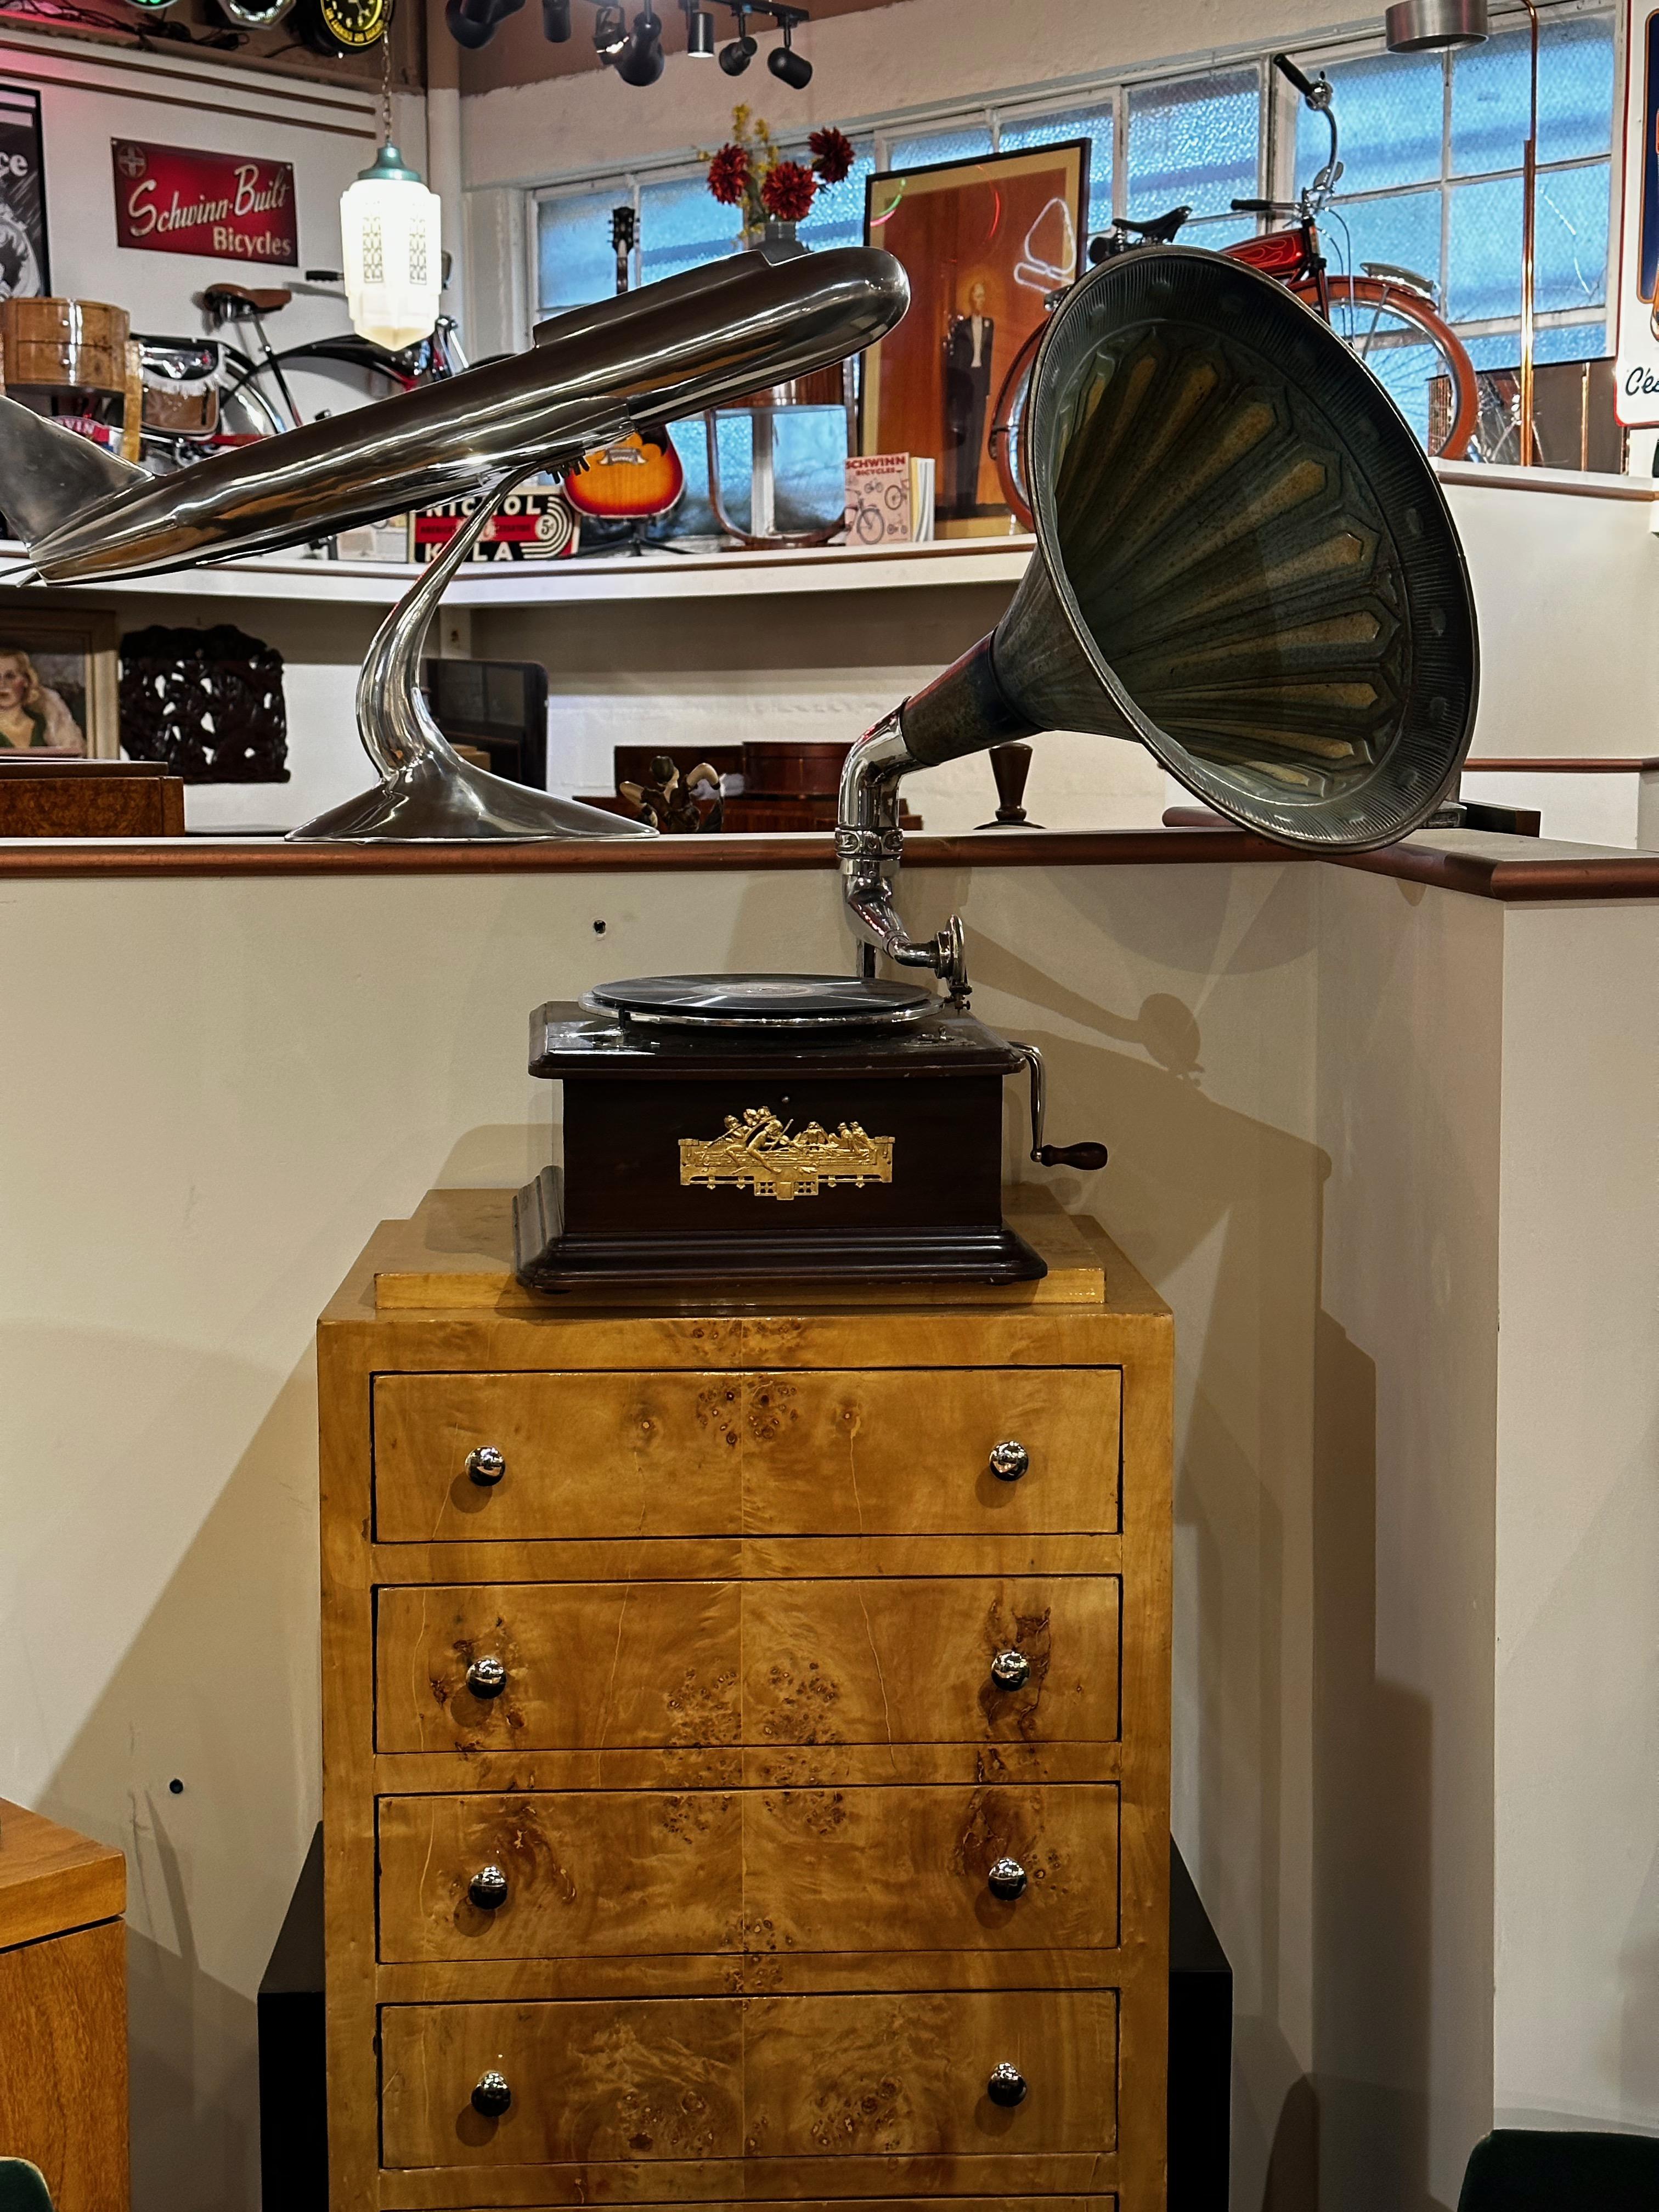 Original Phonograph Argentina With Horn Circa 1920. Great working photograph in very nice original condition with the most beautiful aged horn in a stunning patina. The sound is excellent. This is one of my favorite windup phonographs, the size is